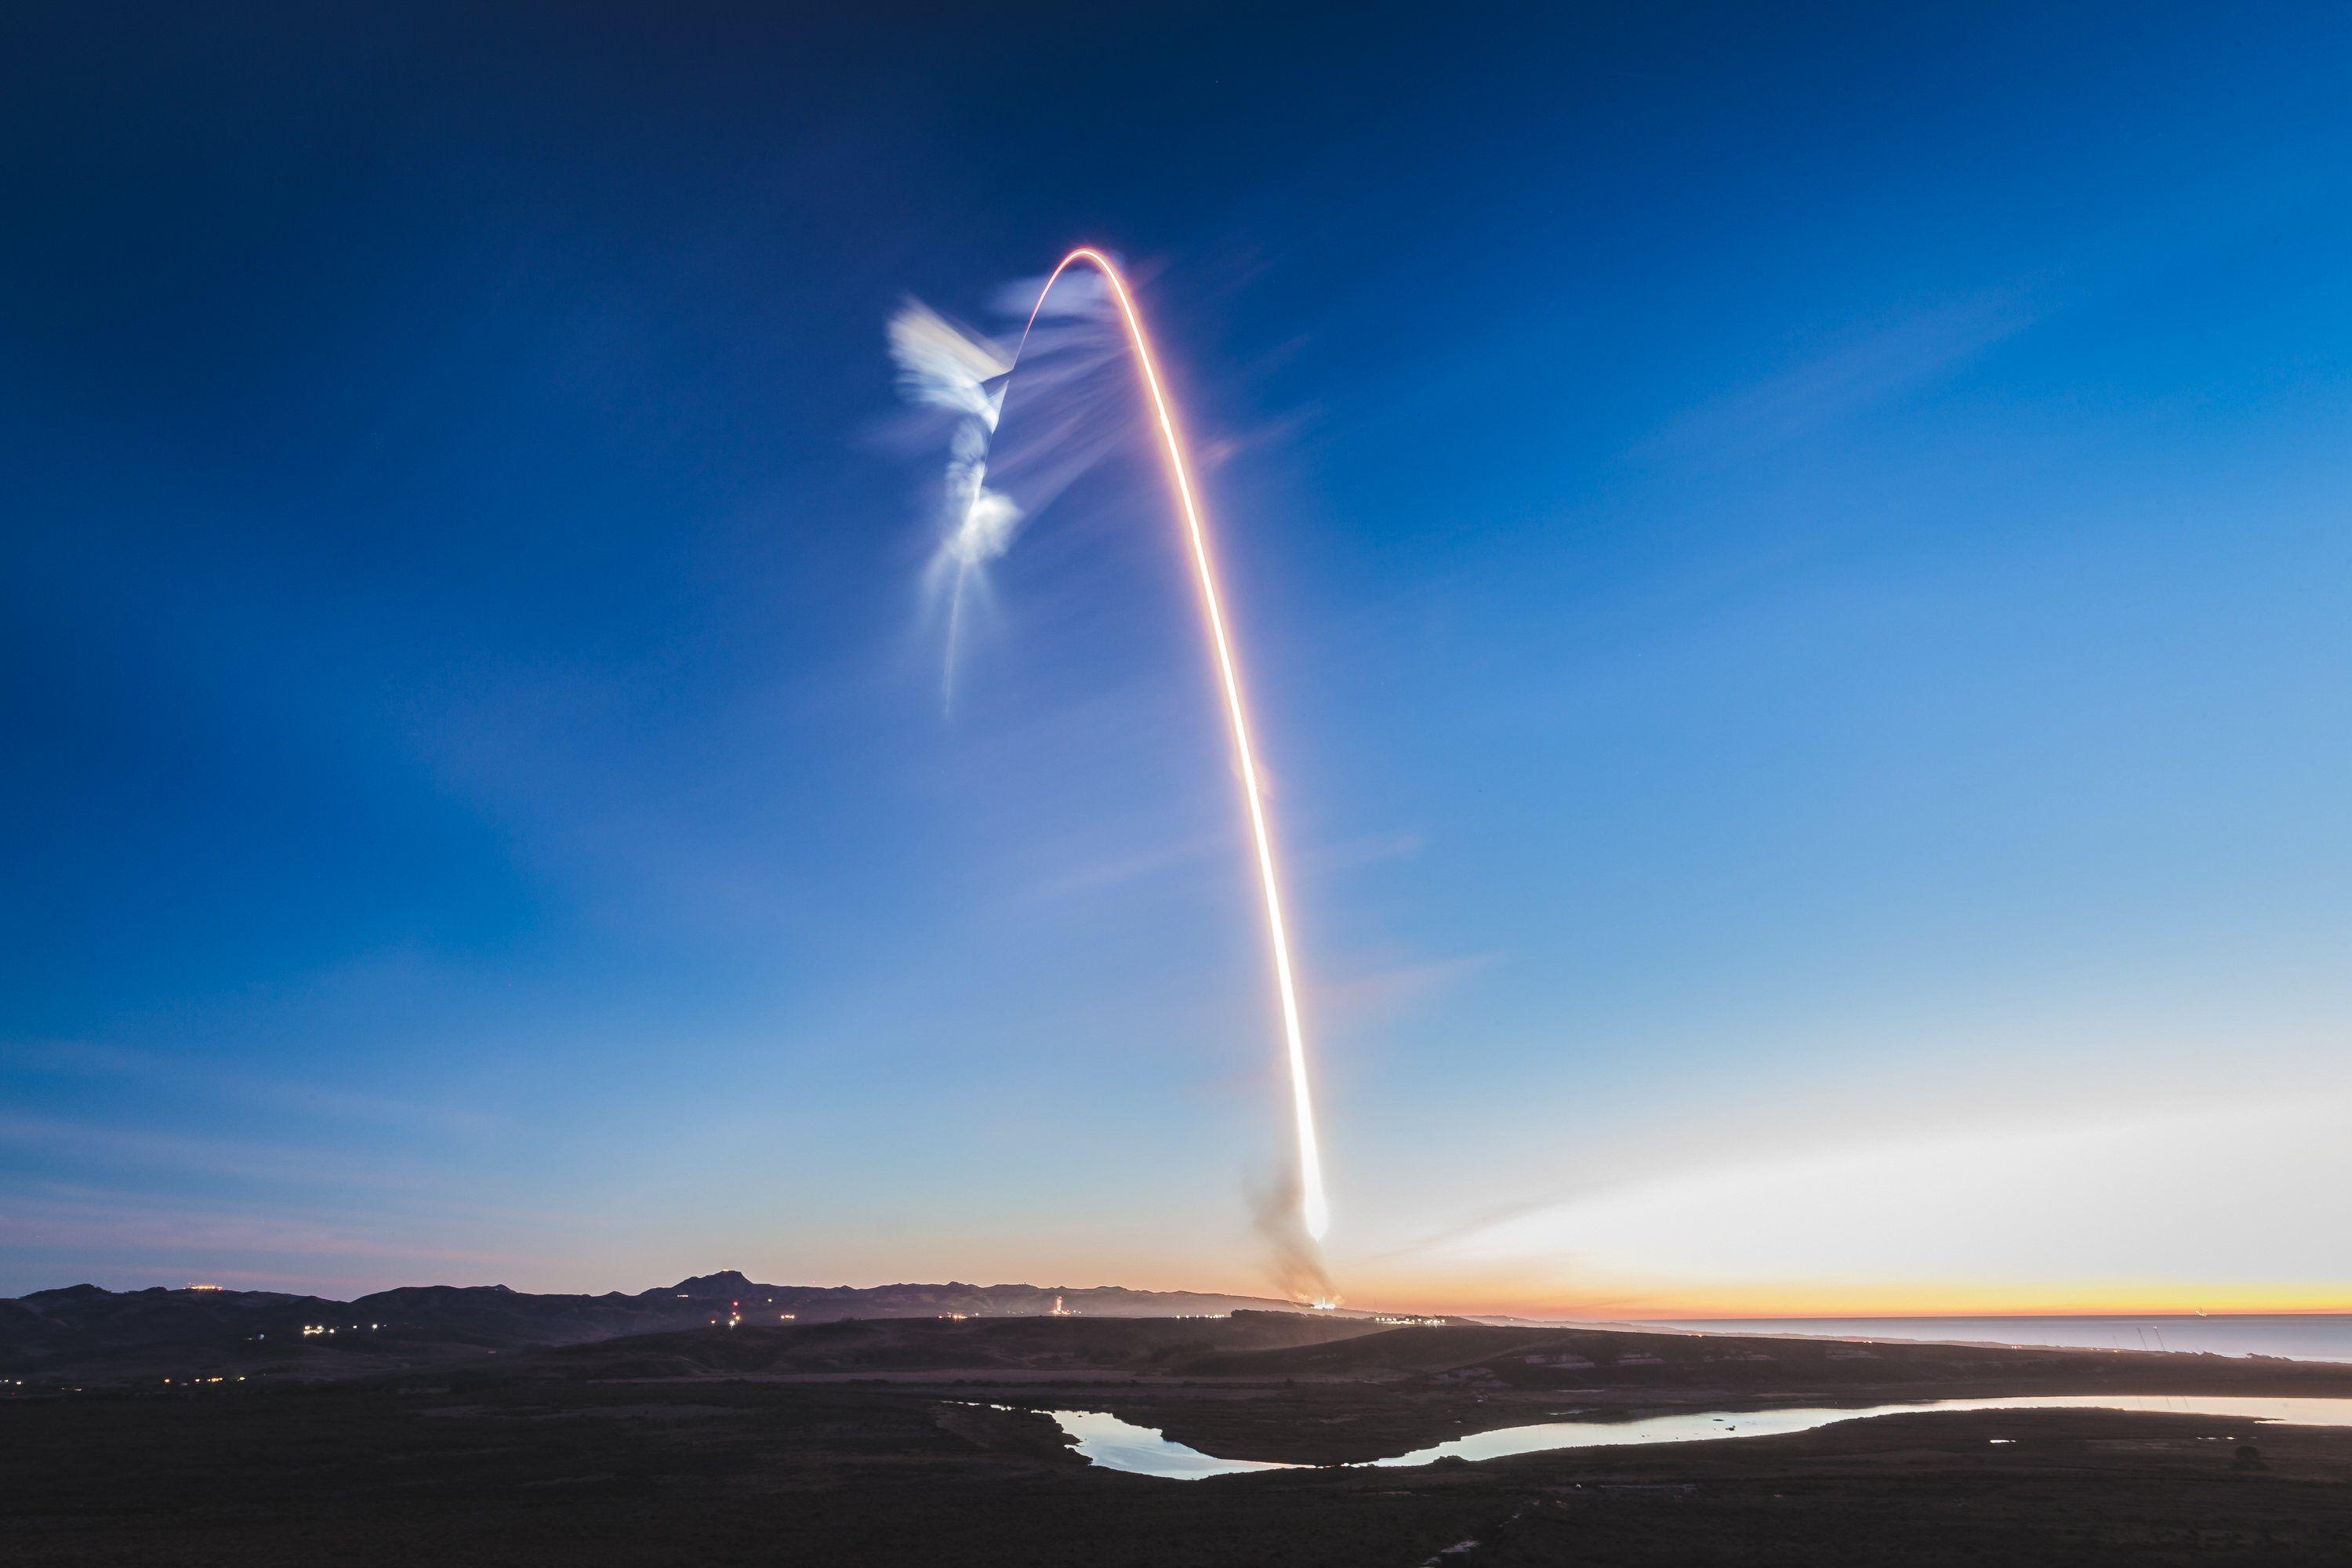 Spacex Launch Wallpapers Wallpaper Cave